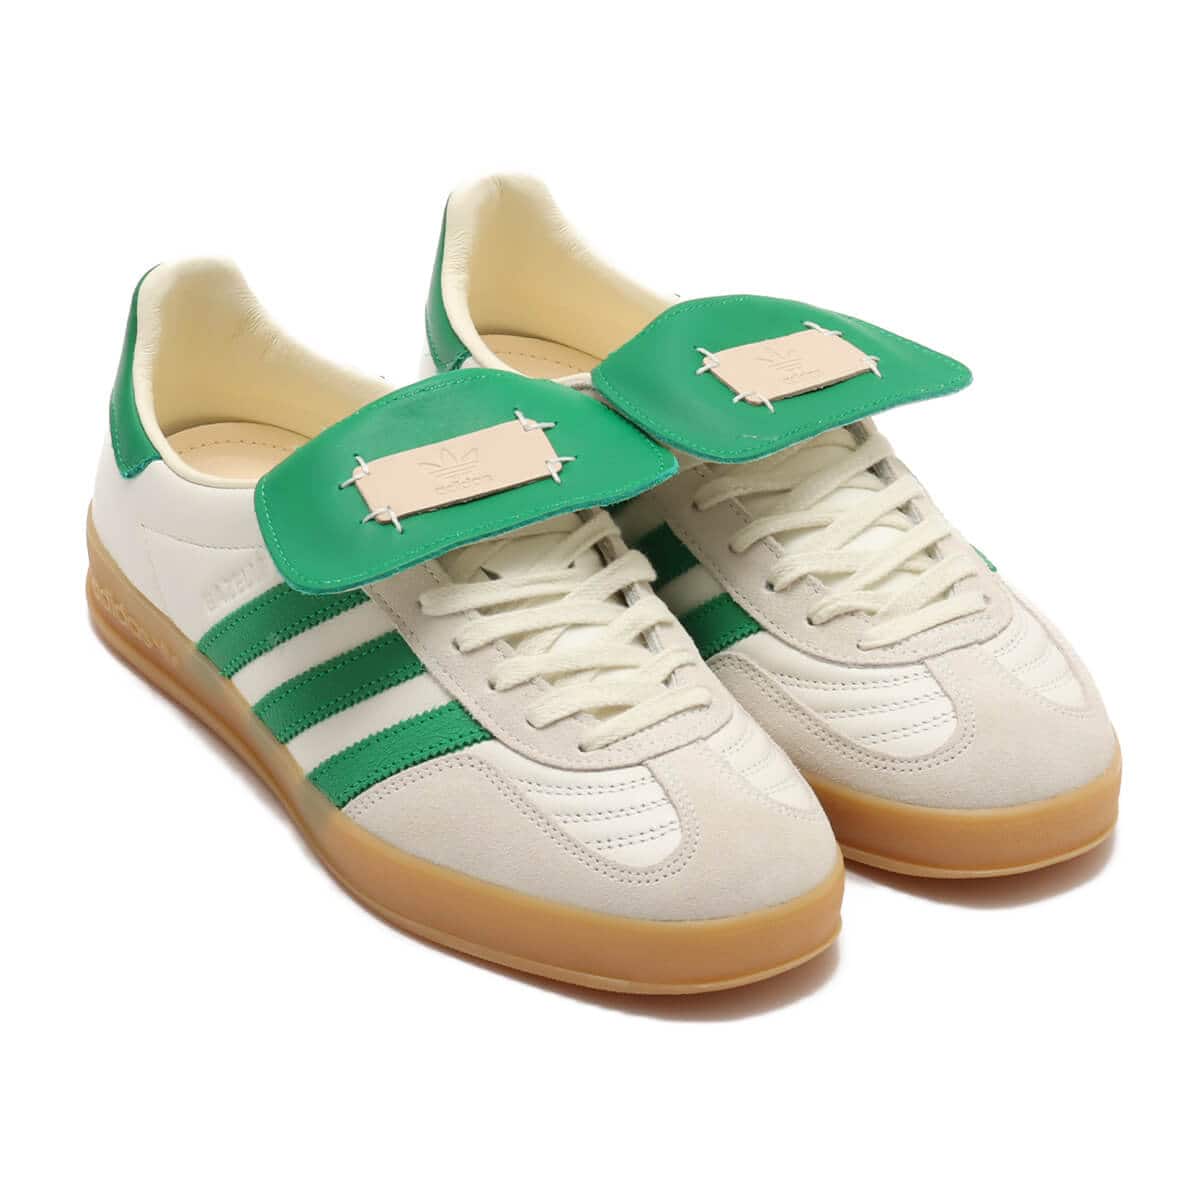 adidas GAZELLE INDOOR FOOT INDUSTRY OFFWHITE/GREEN/OFFWHITE